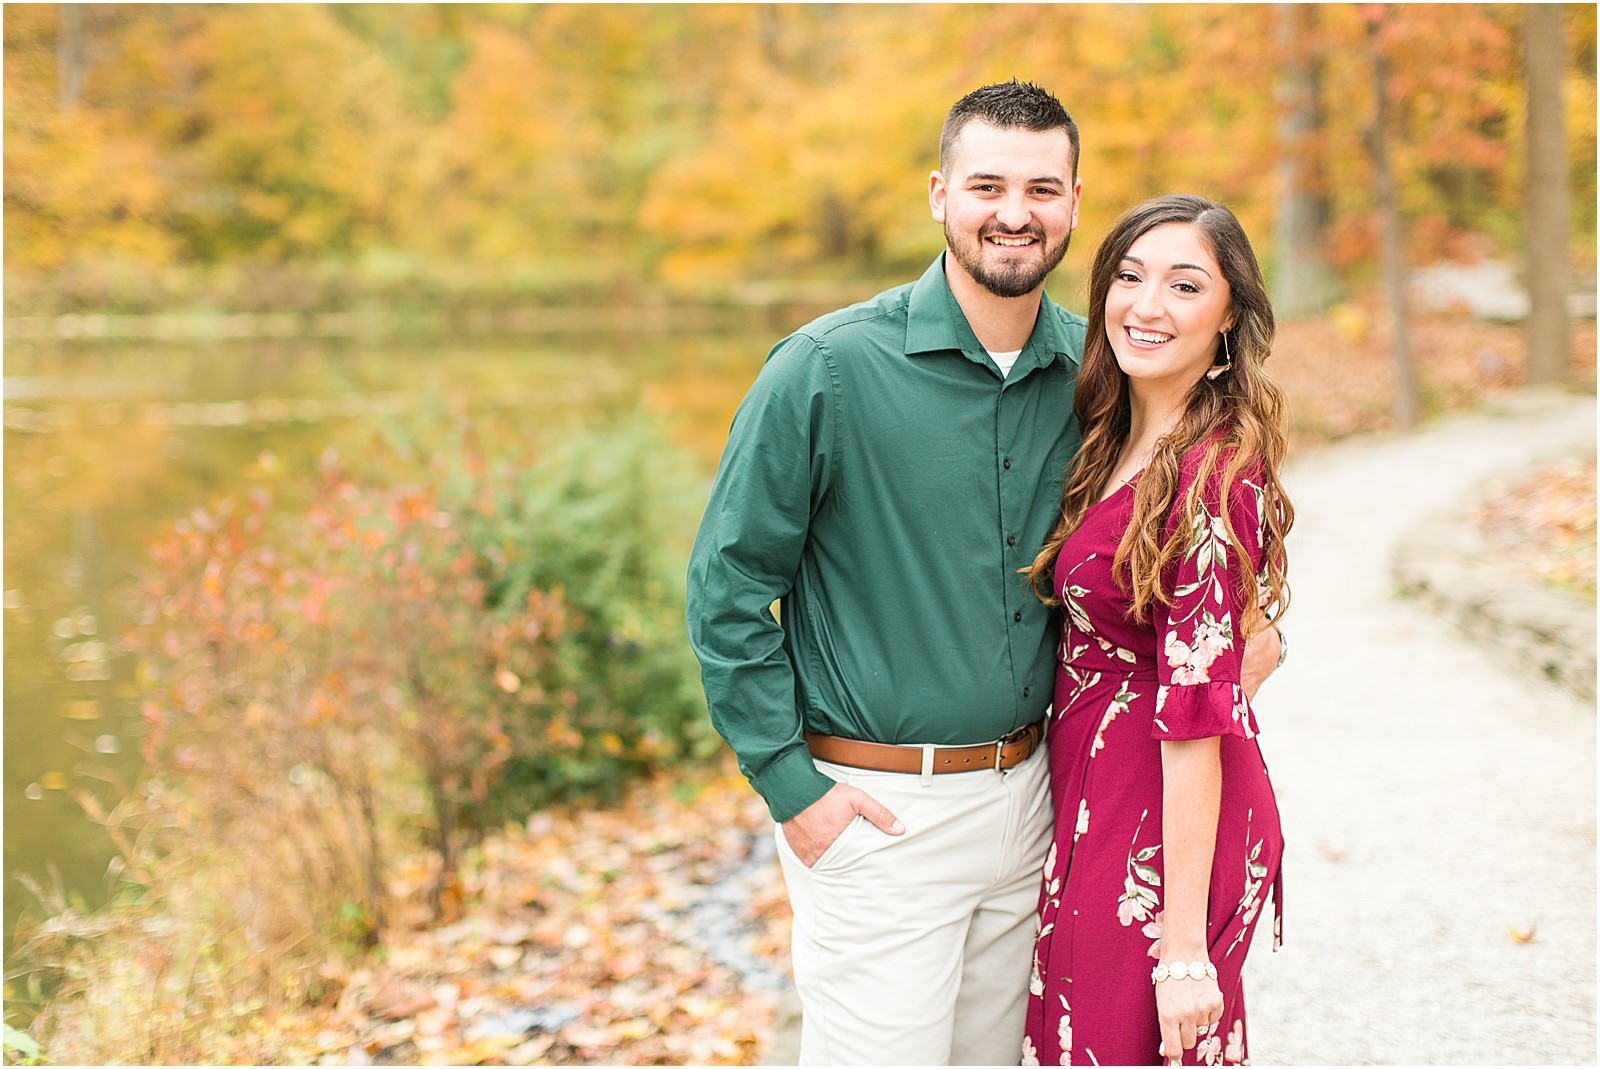 A Fall Oliver Winery Engagement Session | Sally and Andrew | Bret and Brandie Photography 0016.jpg